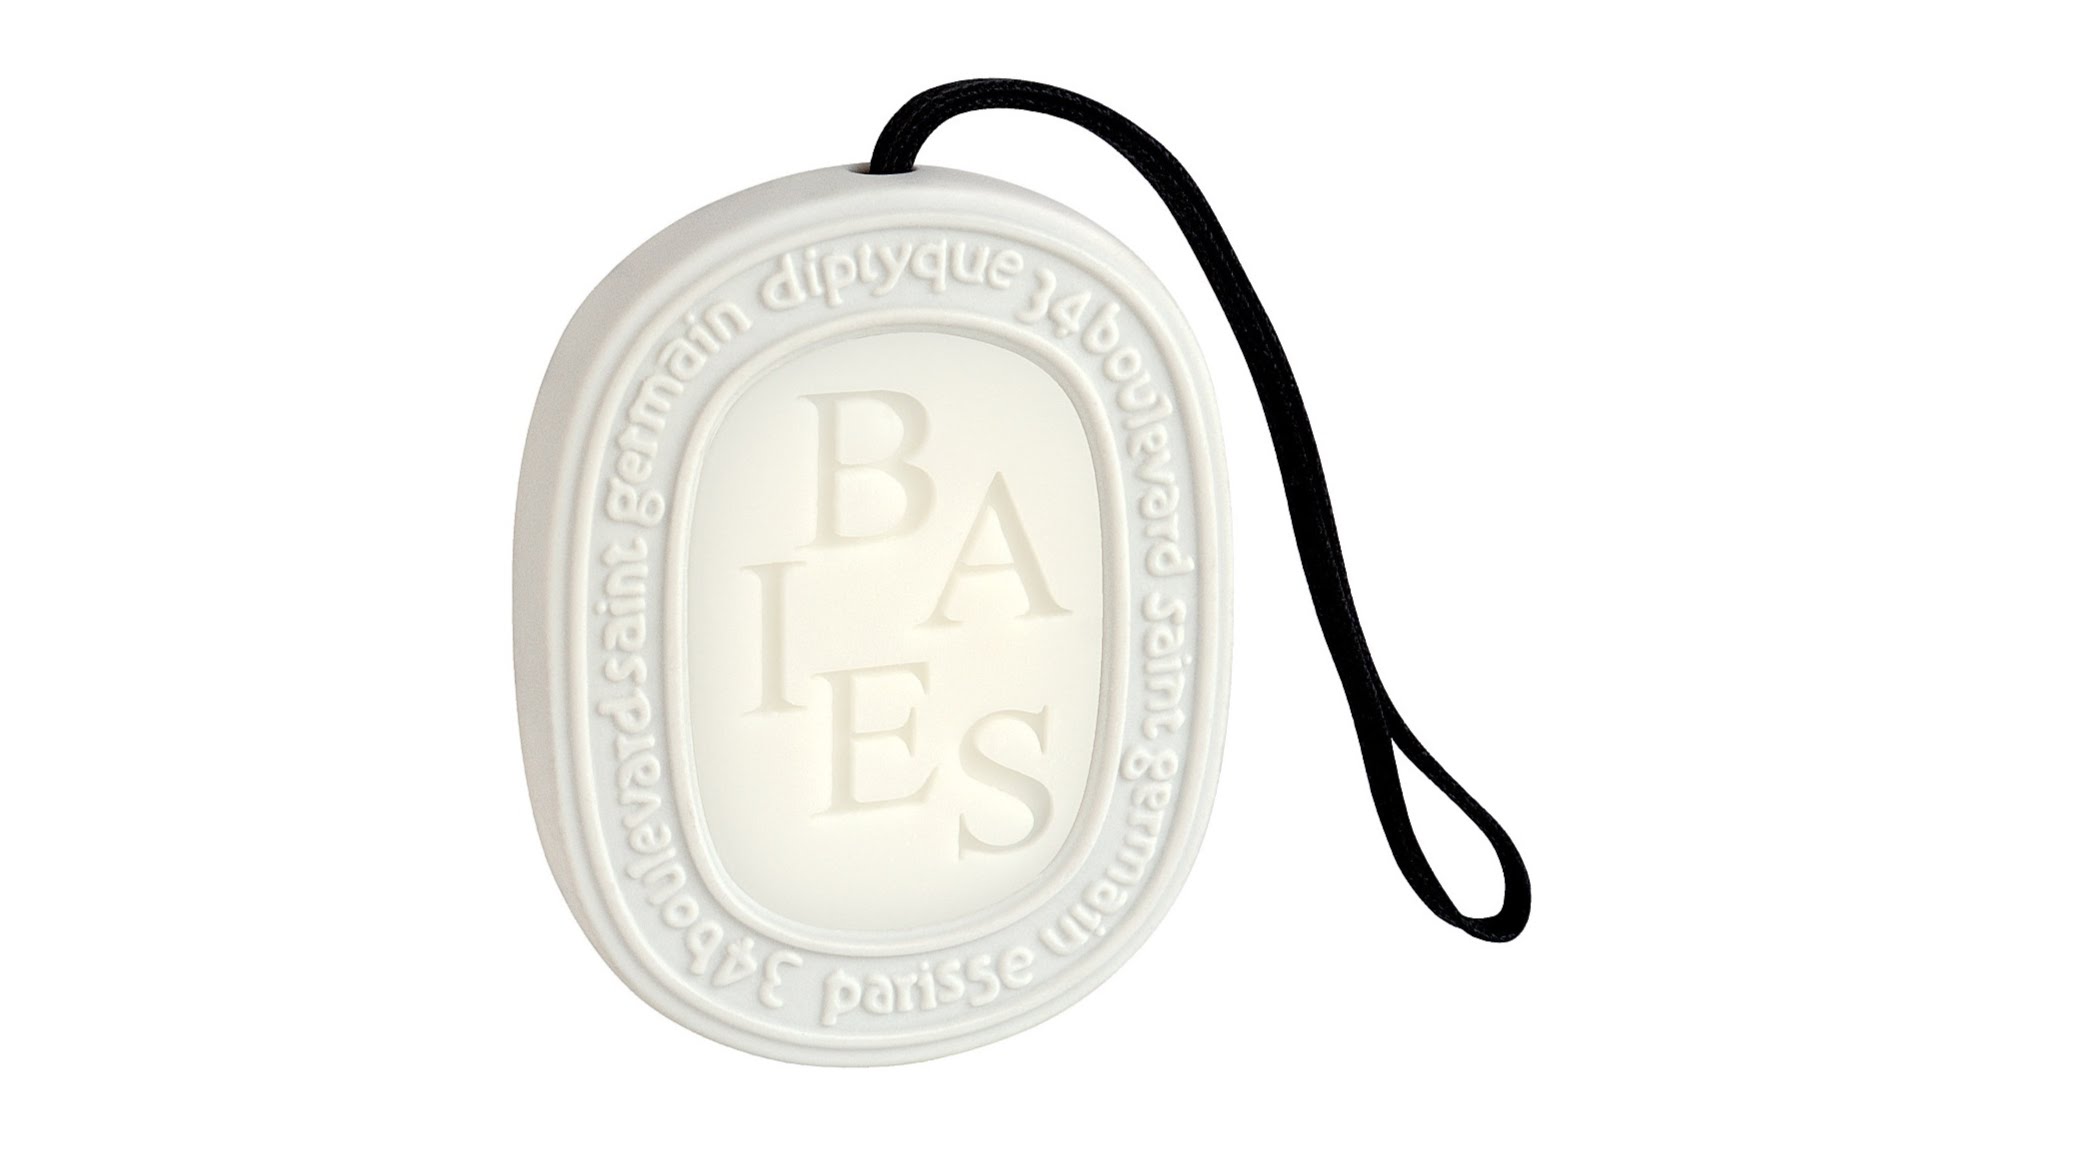 Best solid air freshener: Diptyque Baies Scented Oval